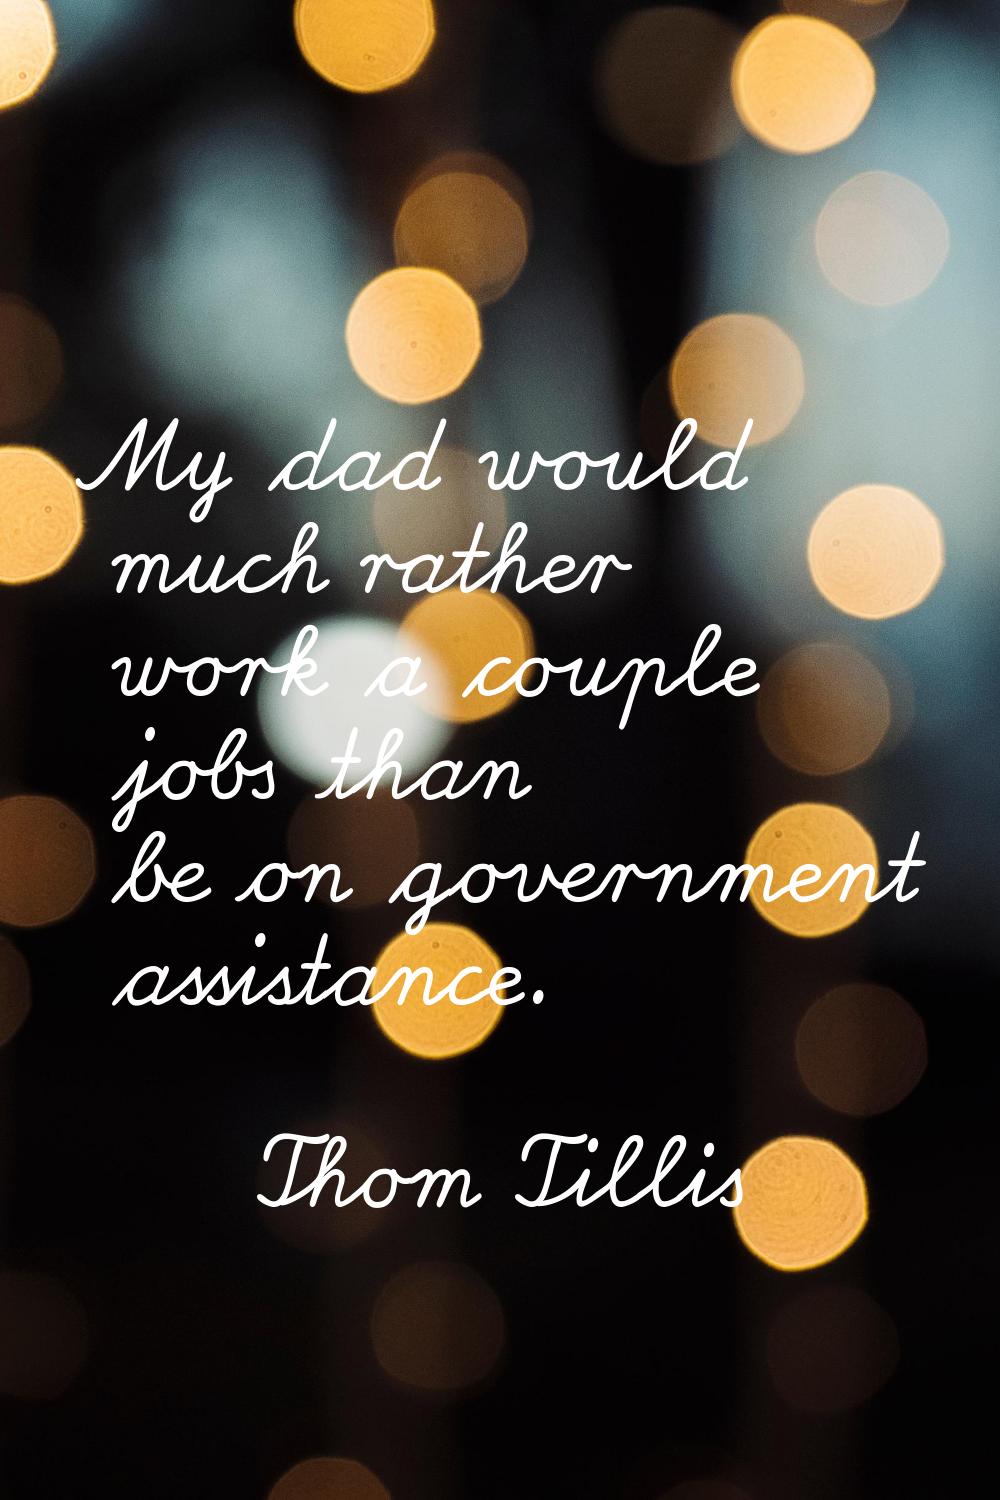 My dad would much rather work a couple jobs than be on government assistance.